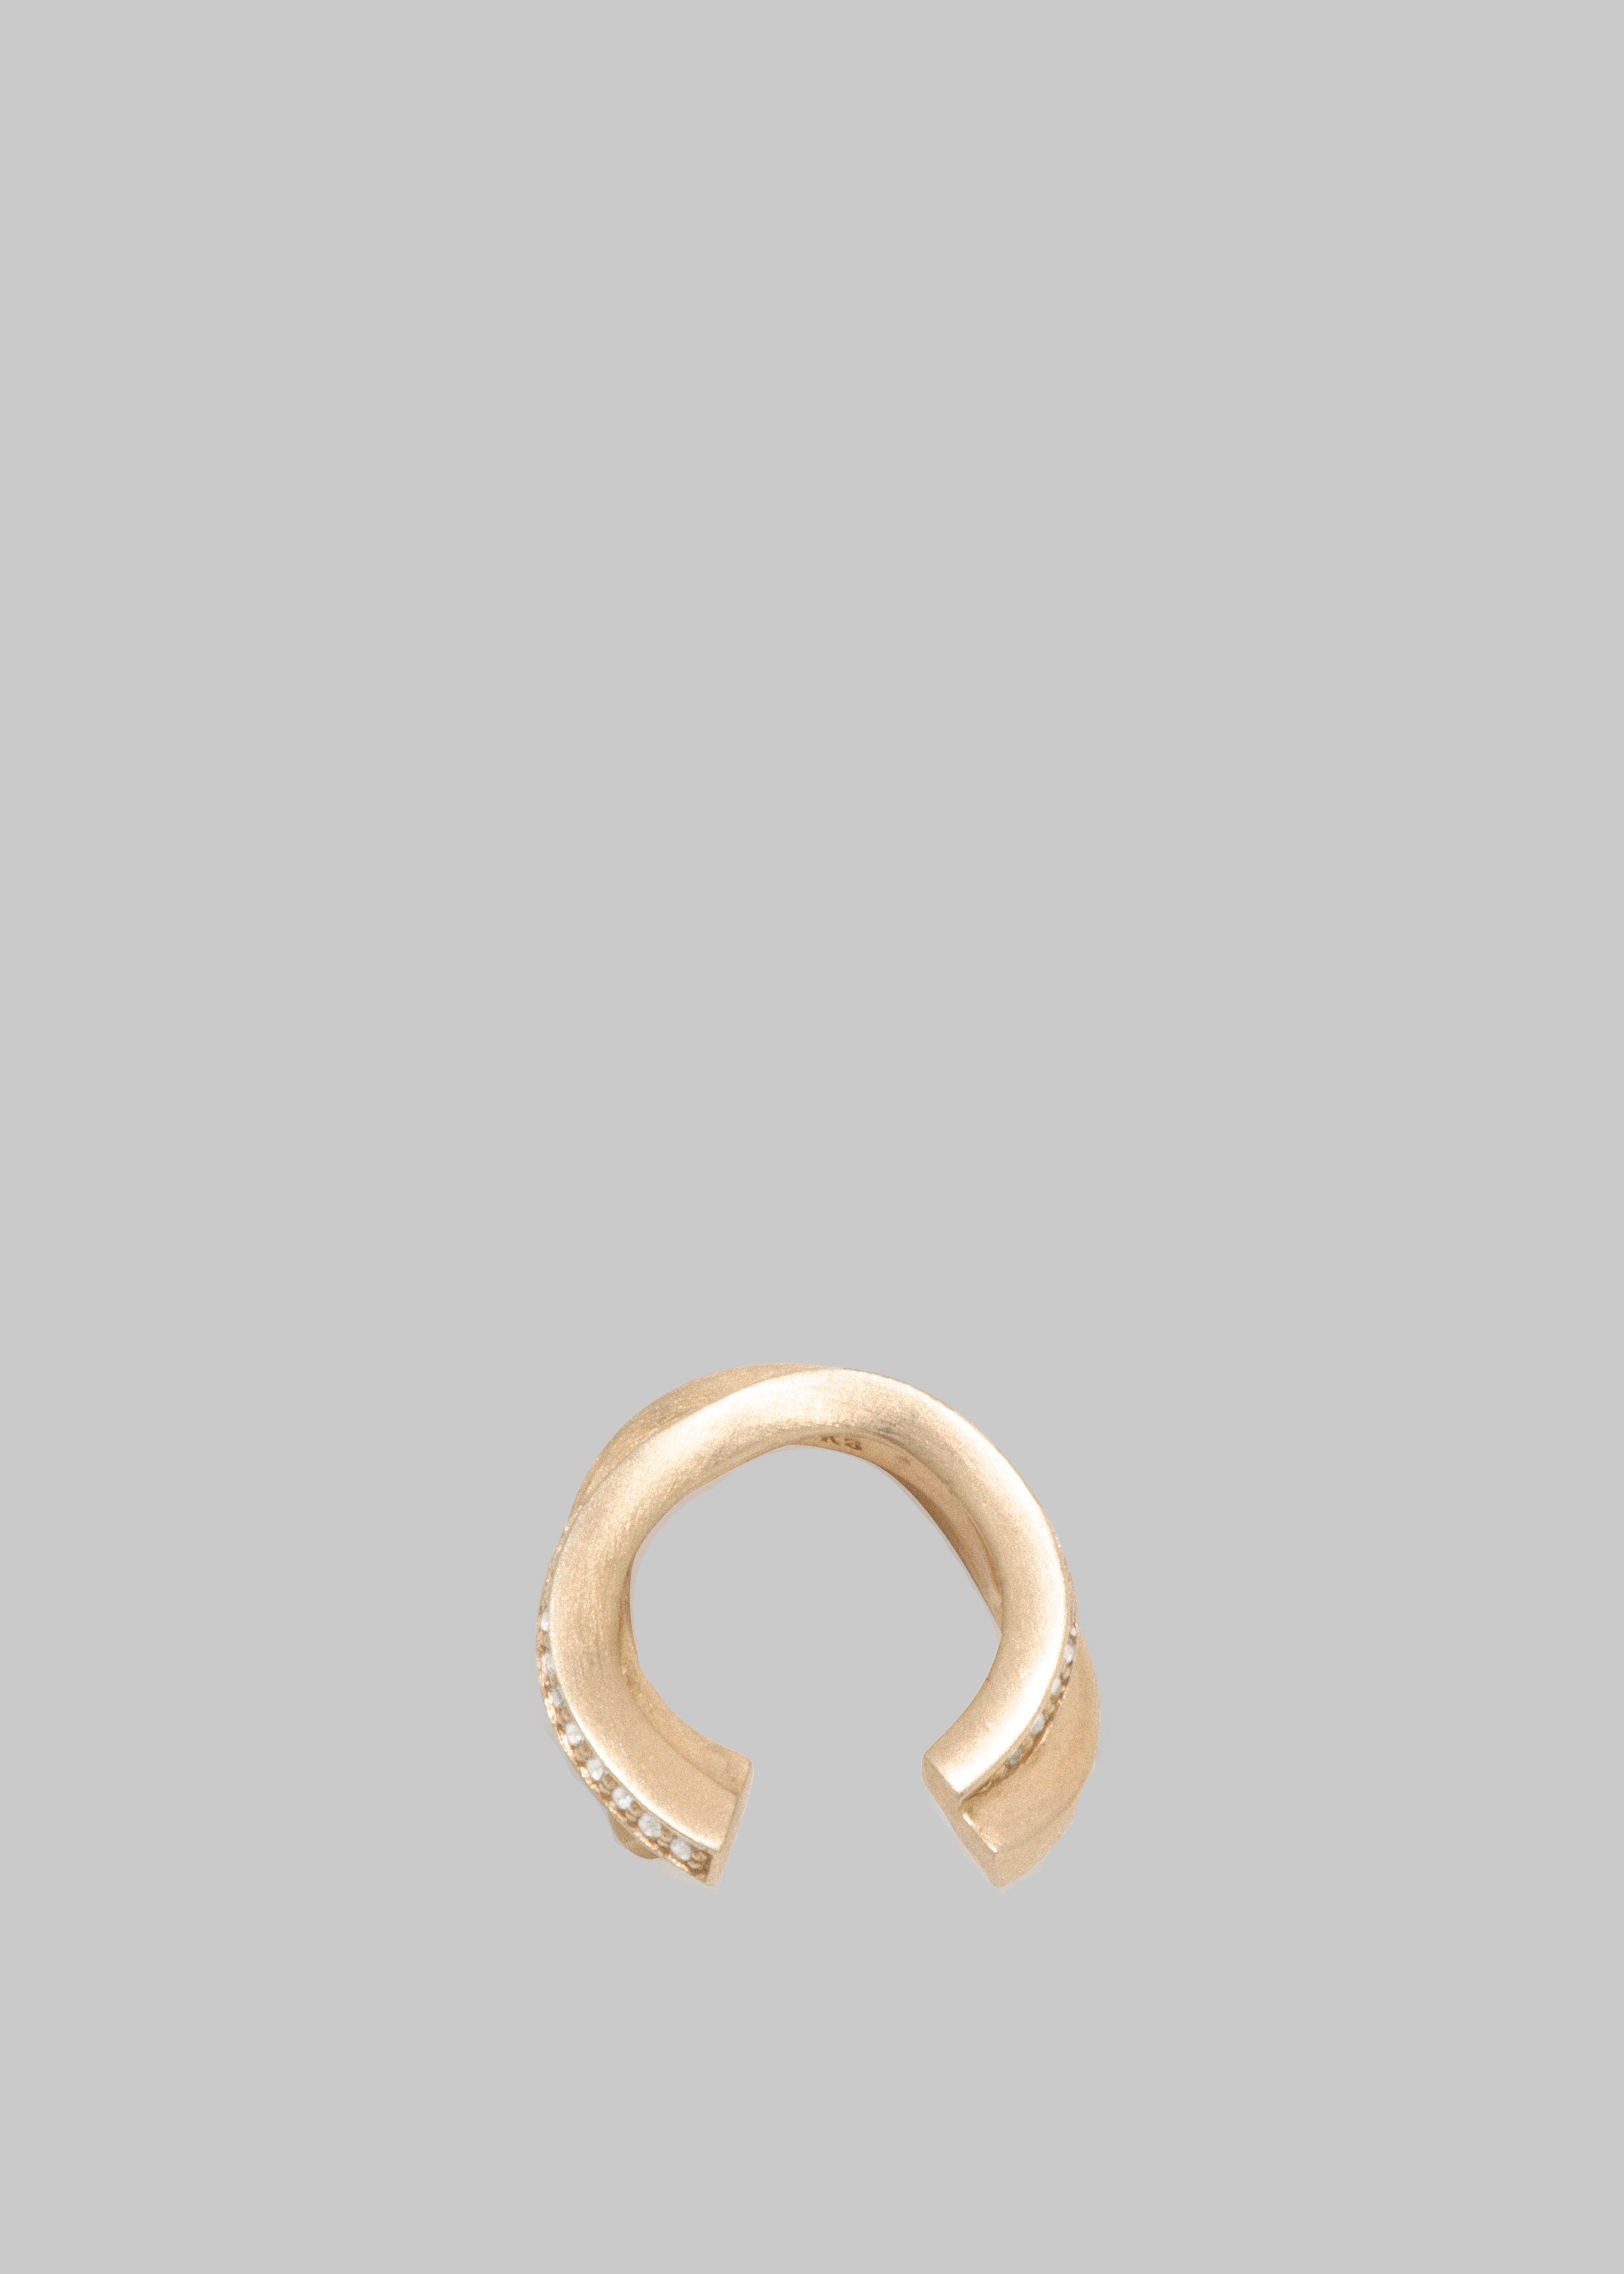 Completedworks We Dare You to Trespass Ear Cuff - Gold - 3